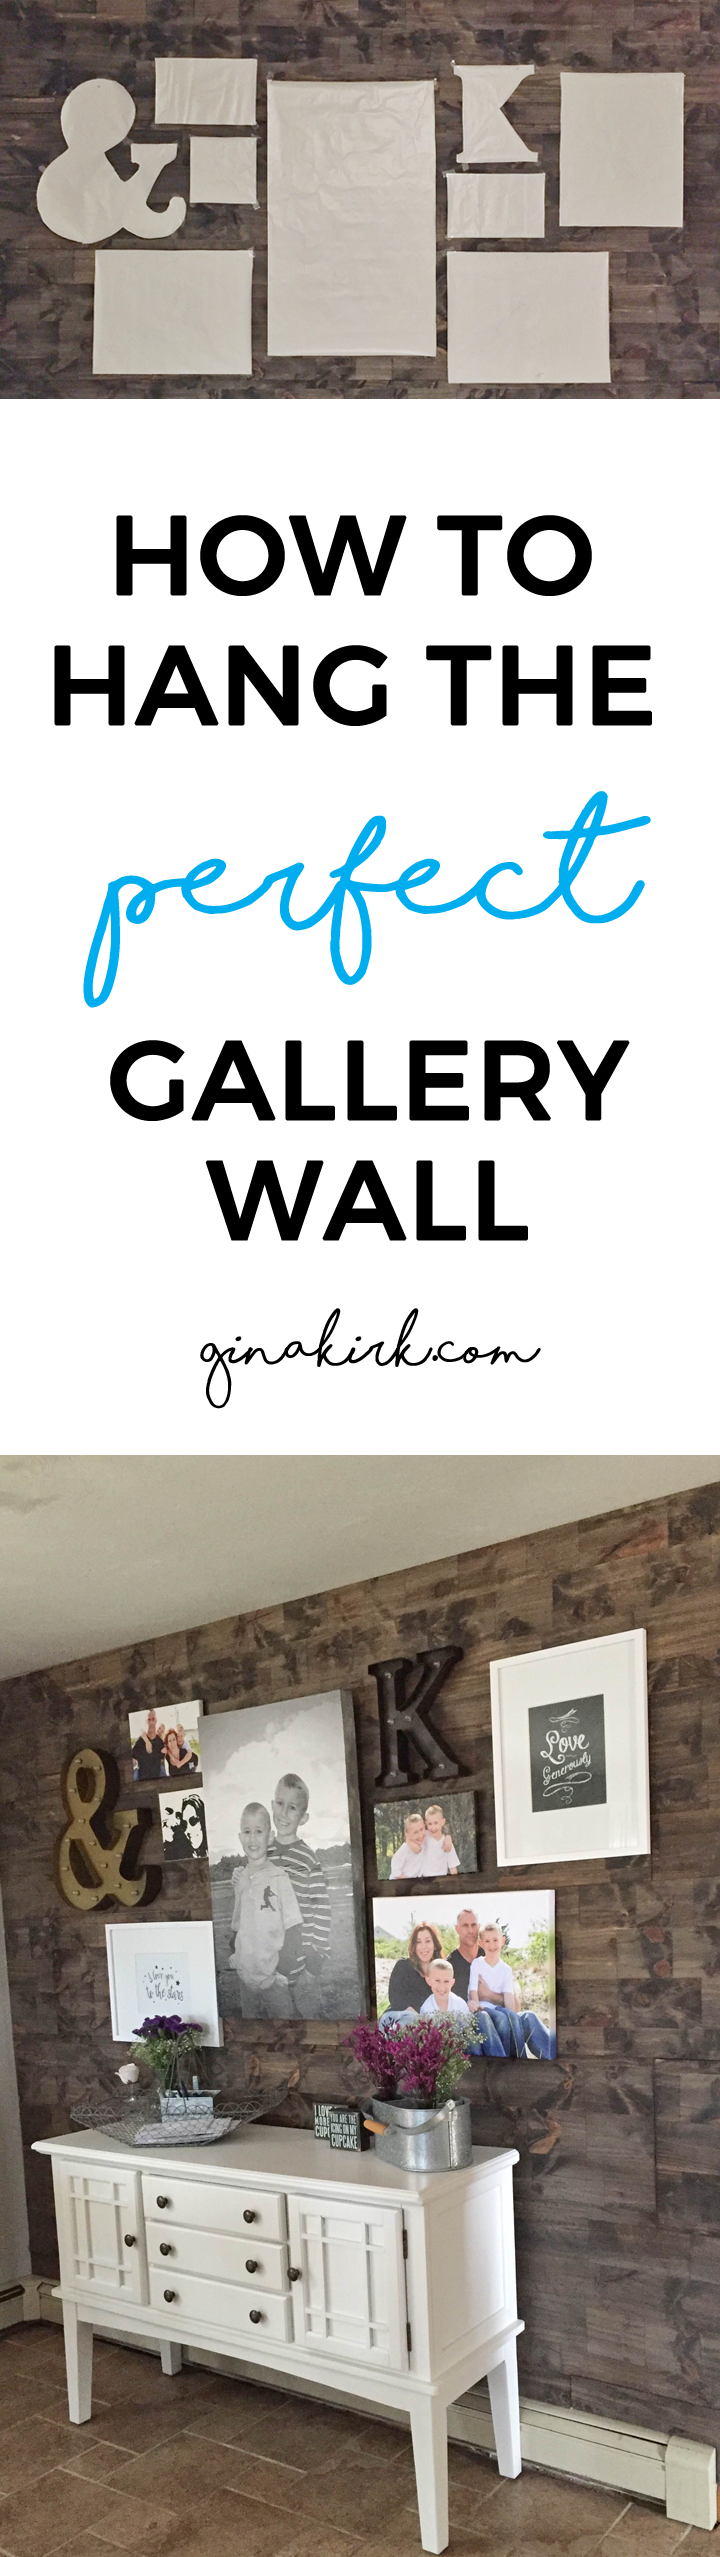 How to hang the perfect gallery wall! GinaKirk.com